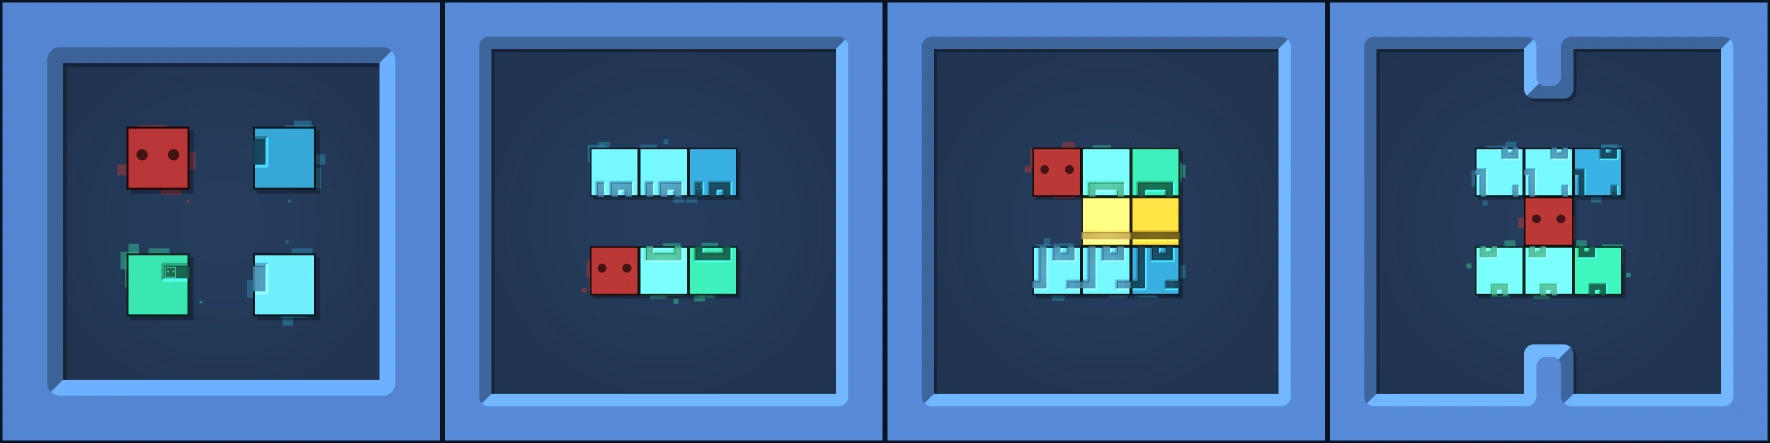 4 puzzles in Patrick's Parabox which are variations on the same idea.